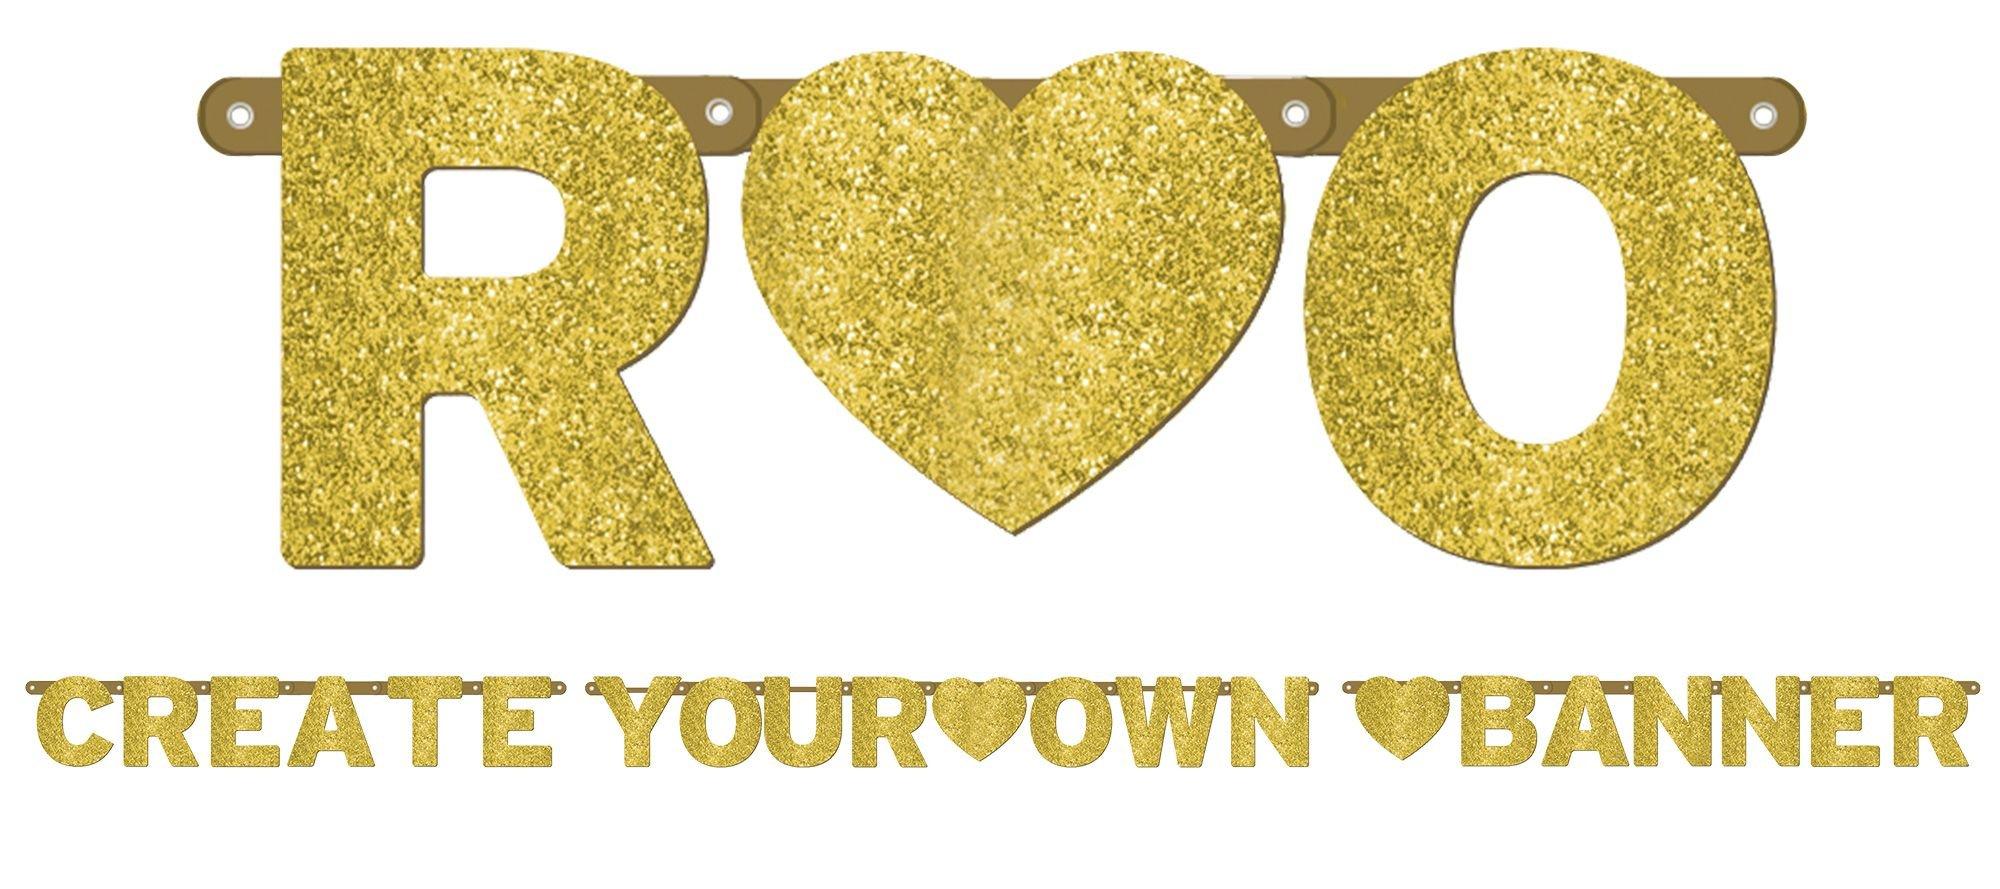 Bright Creations DIY Gold Glitter Customizable Banner Kit with Letters,  Numbers, and Symbols (130 Pieces) - Macy's